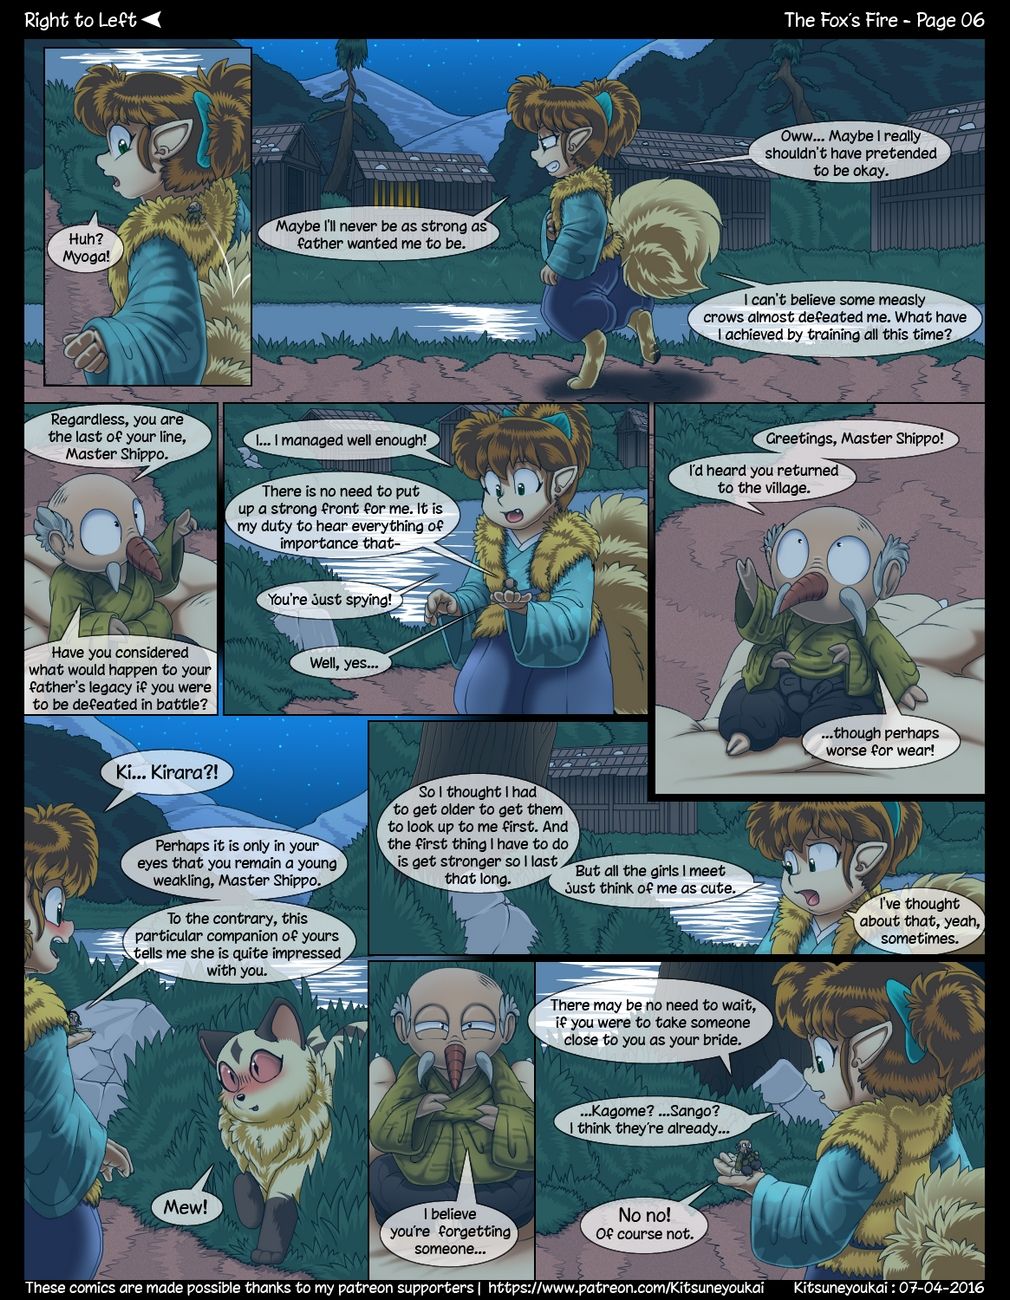 The Fox's Inner Fire page 7